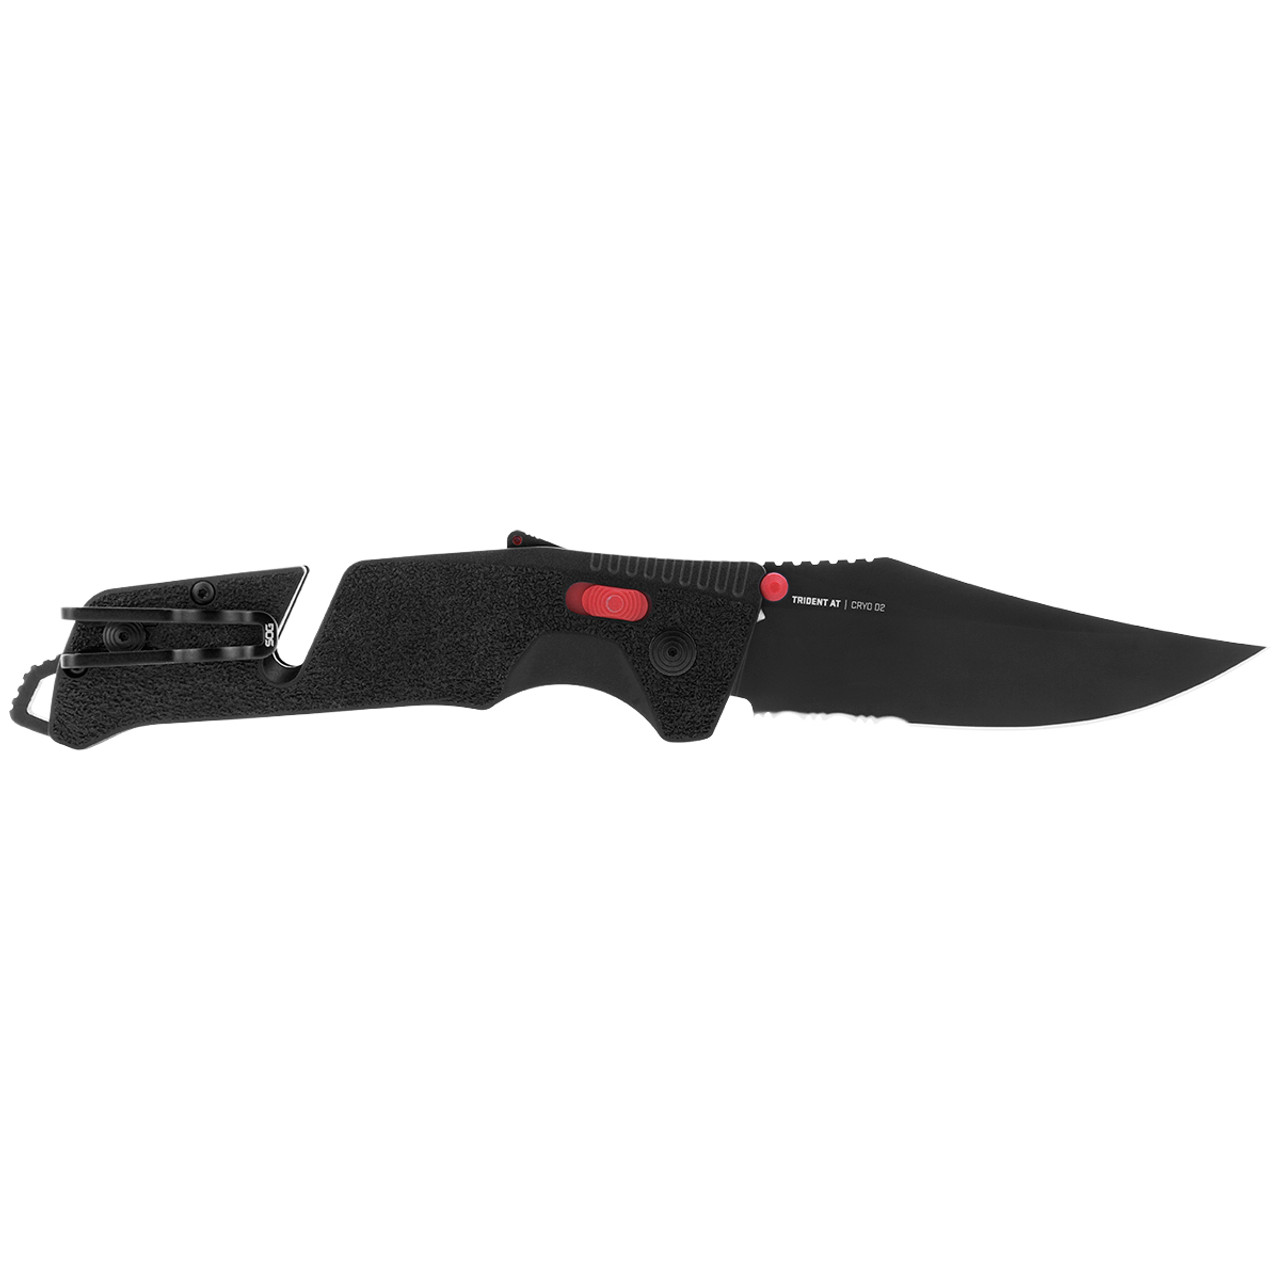 Trident AT - Black & Red, Serrated